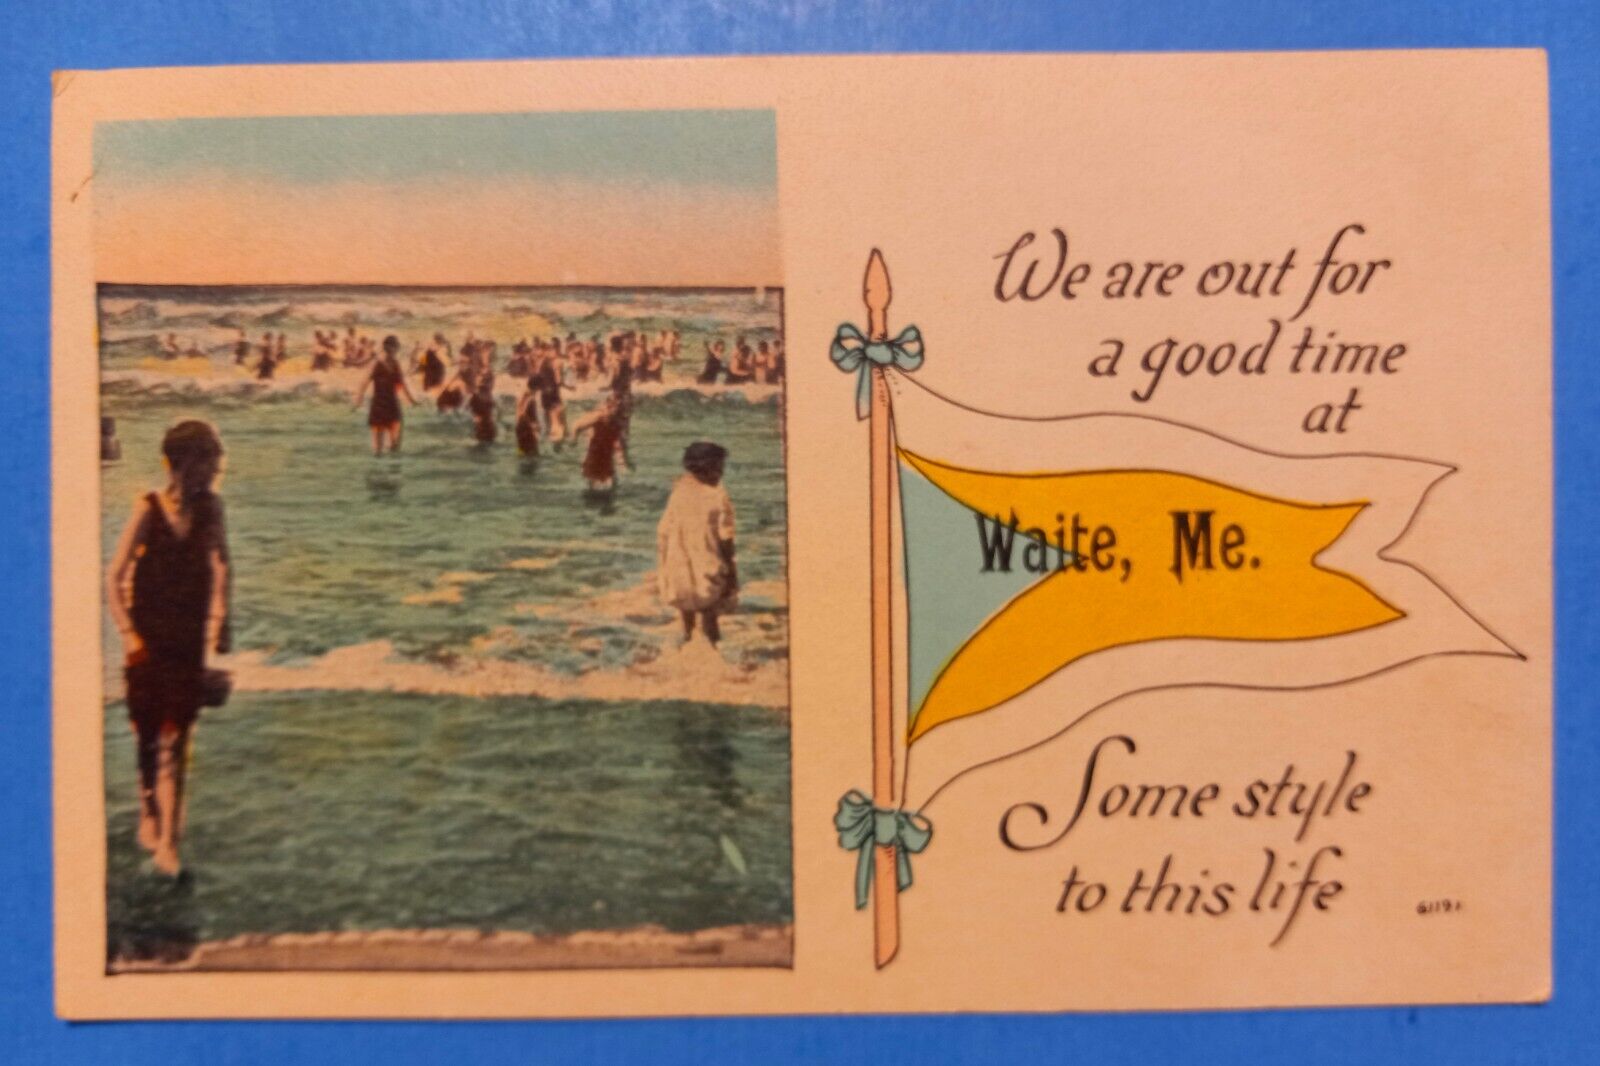 We're Out for a Good Time at WAITE, MAINE Vintage Postcard Beach Scene